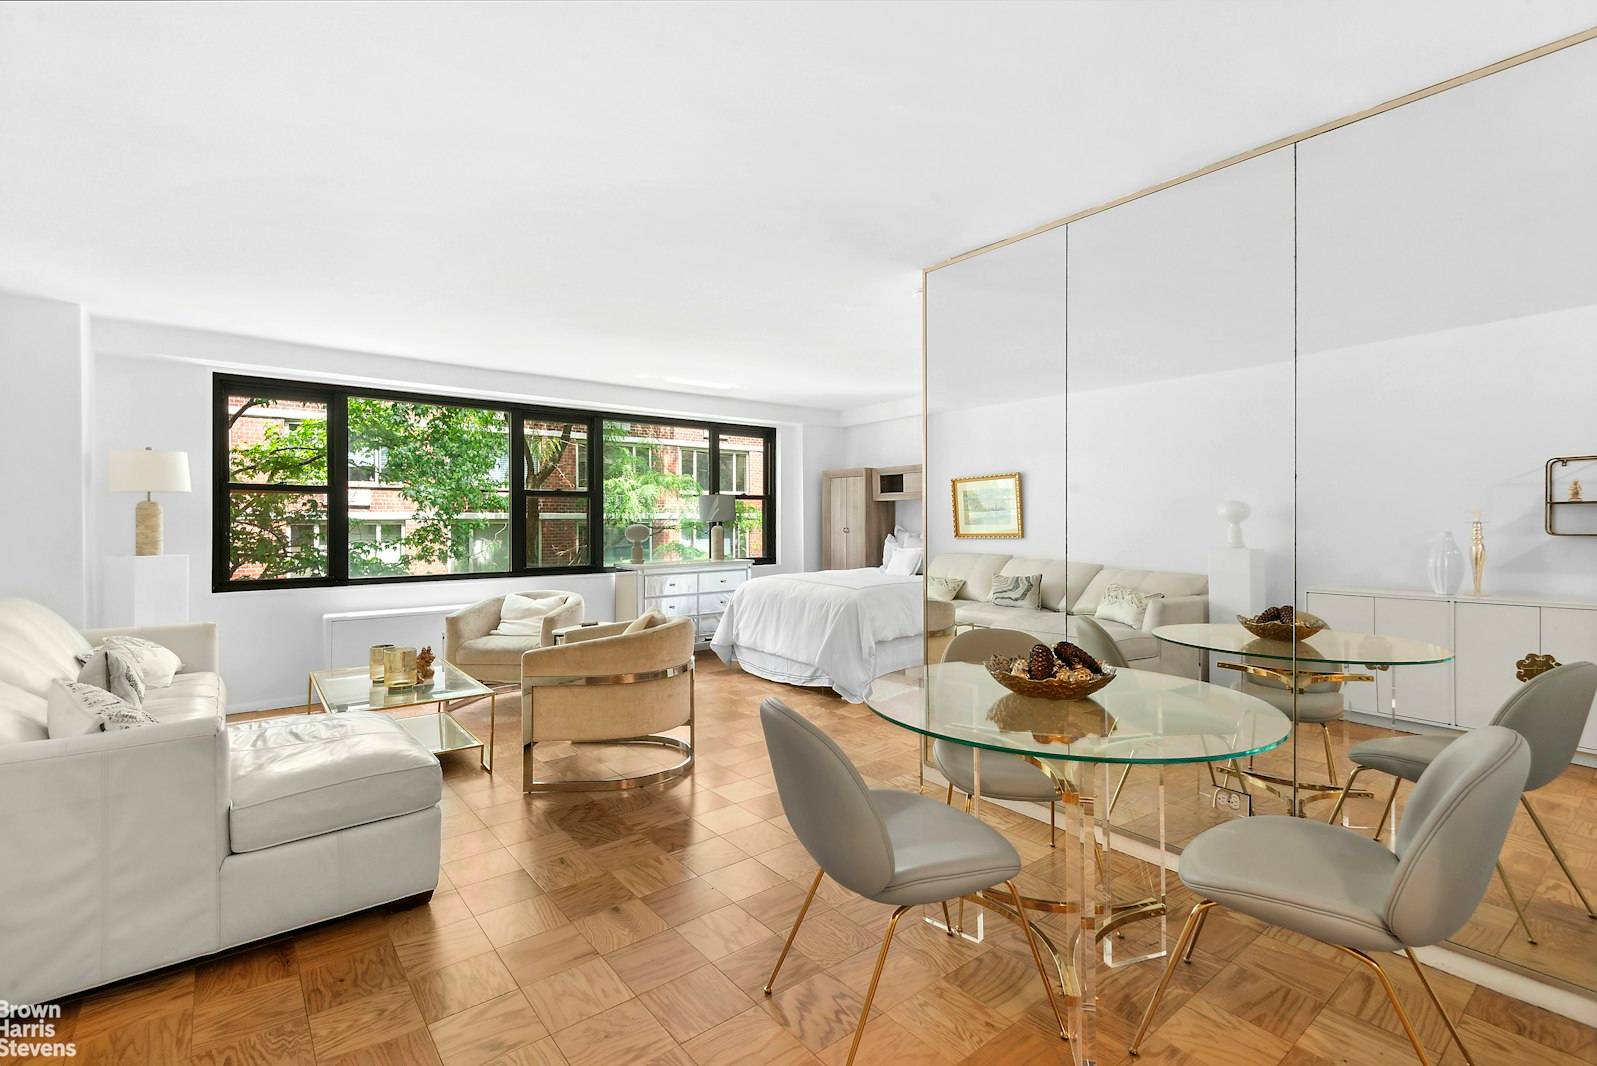 Room to Roam Welcome to Co op living at its finest at 165 West 66th Street where the city is at your fingertips.